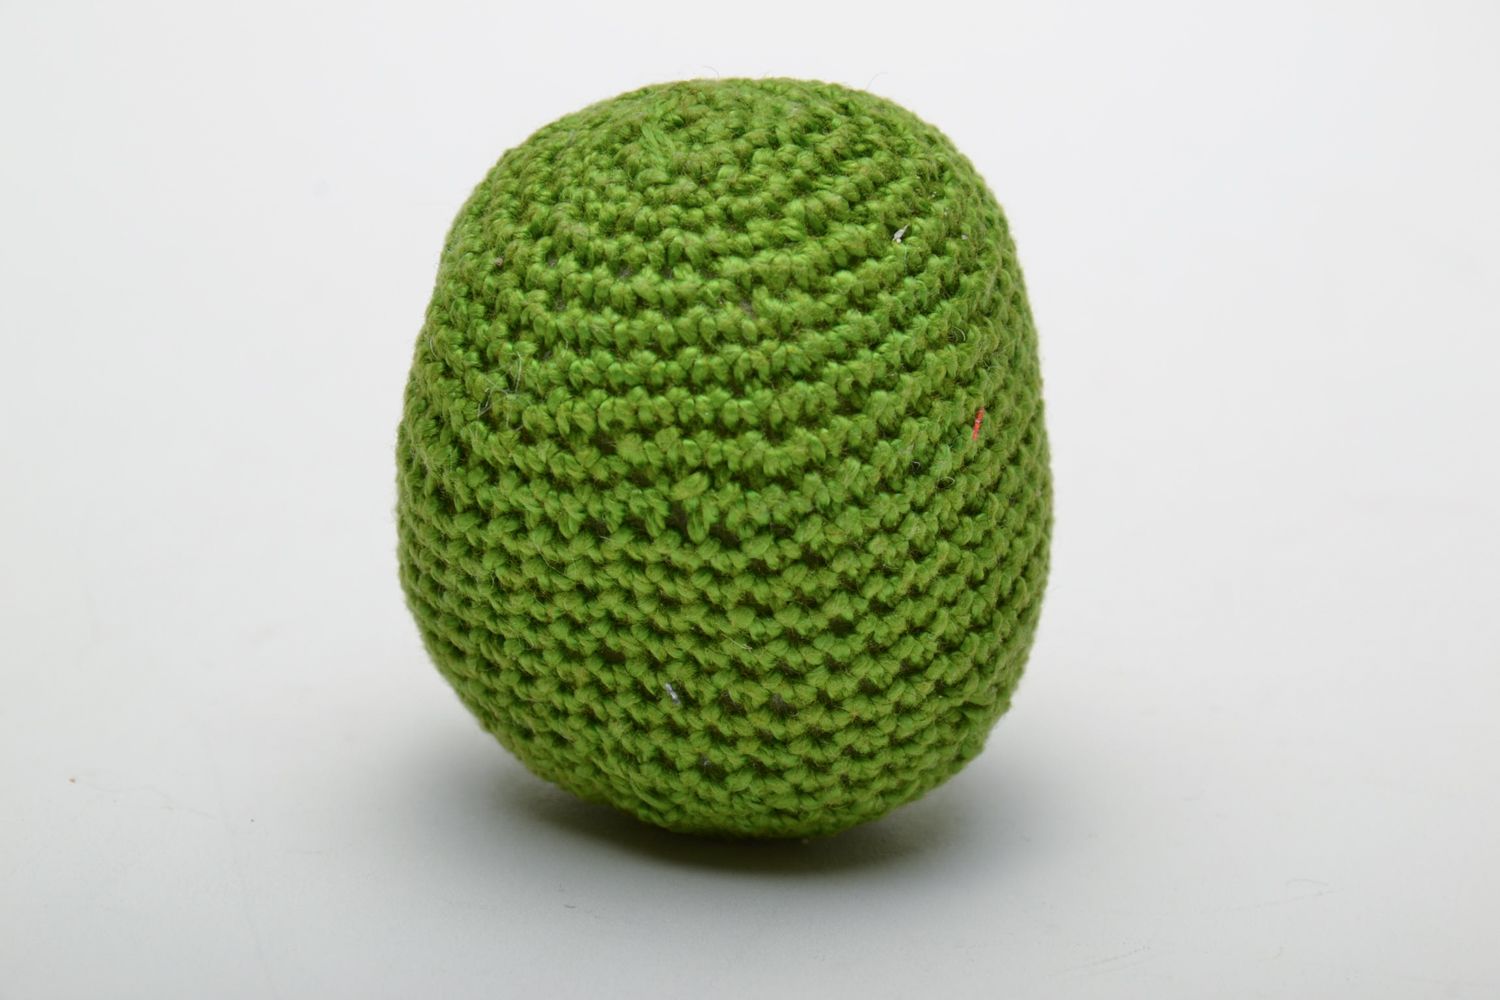 Crochet toy lime made of natural materials photo 4